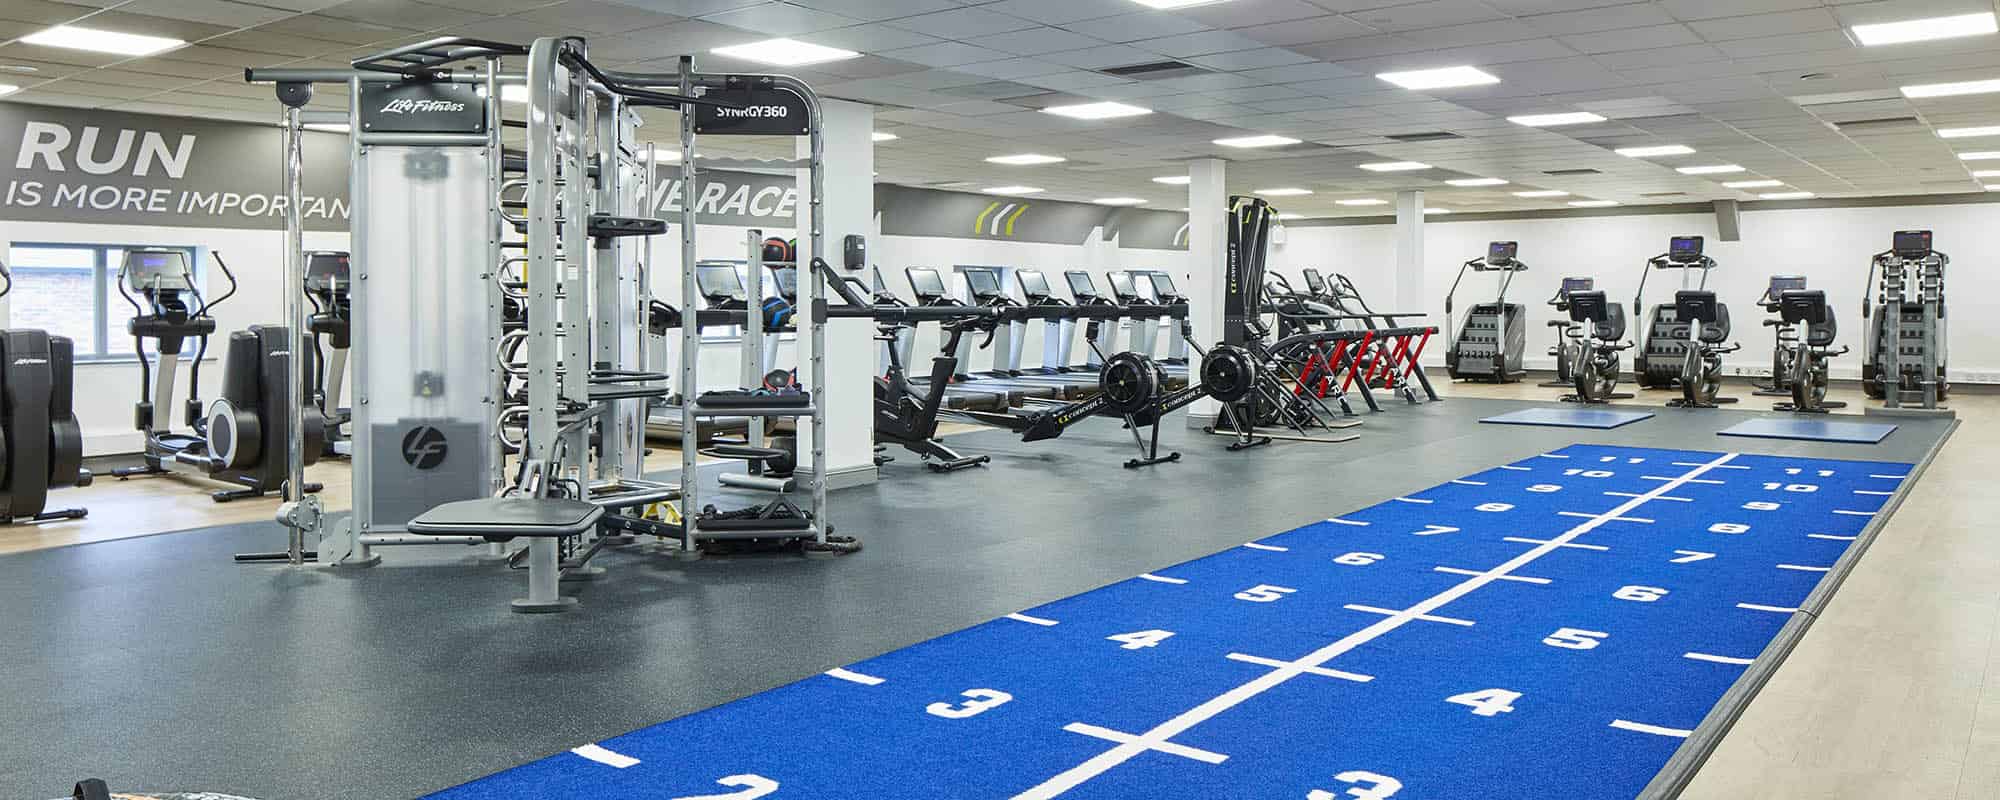 Worsley Park Marriott's fitness centre with weights and cardio machines